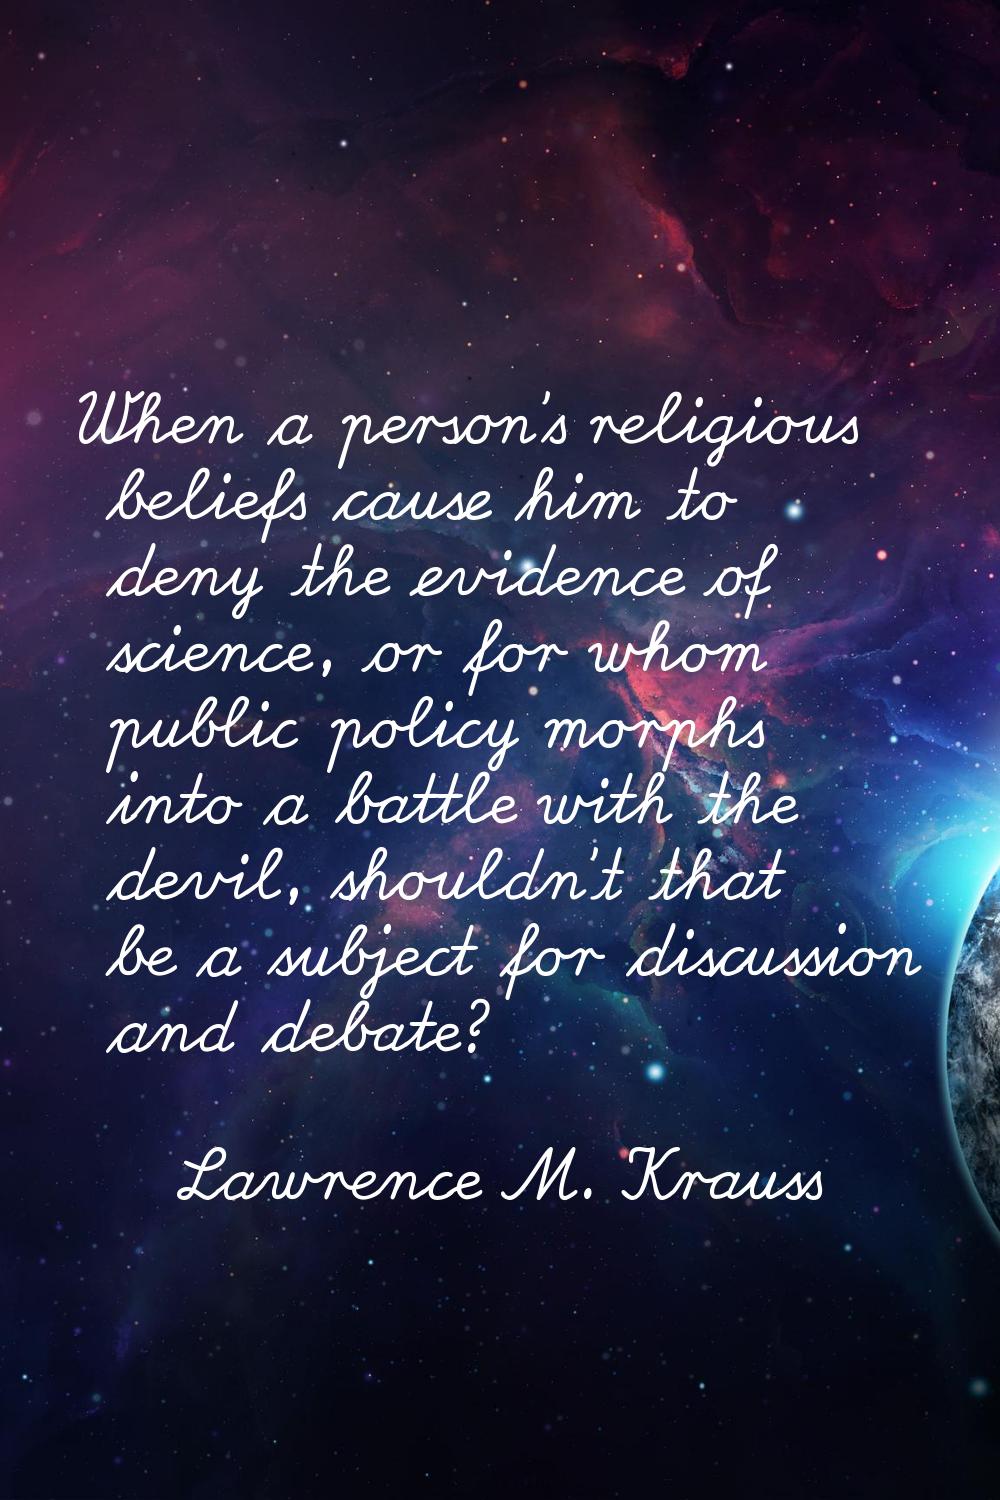 When a person's religious beliefs cause him to deny the evidence of science, or for whom public pol